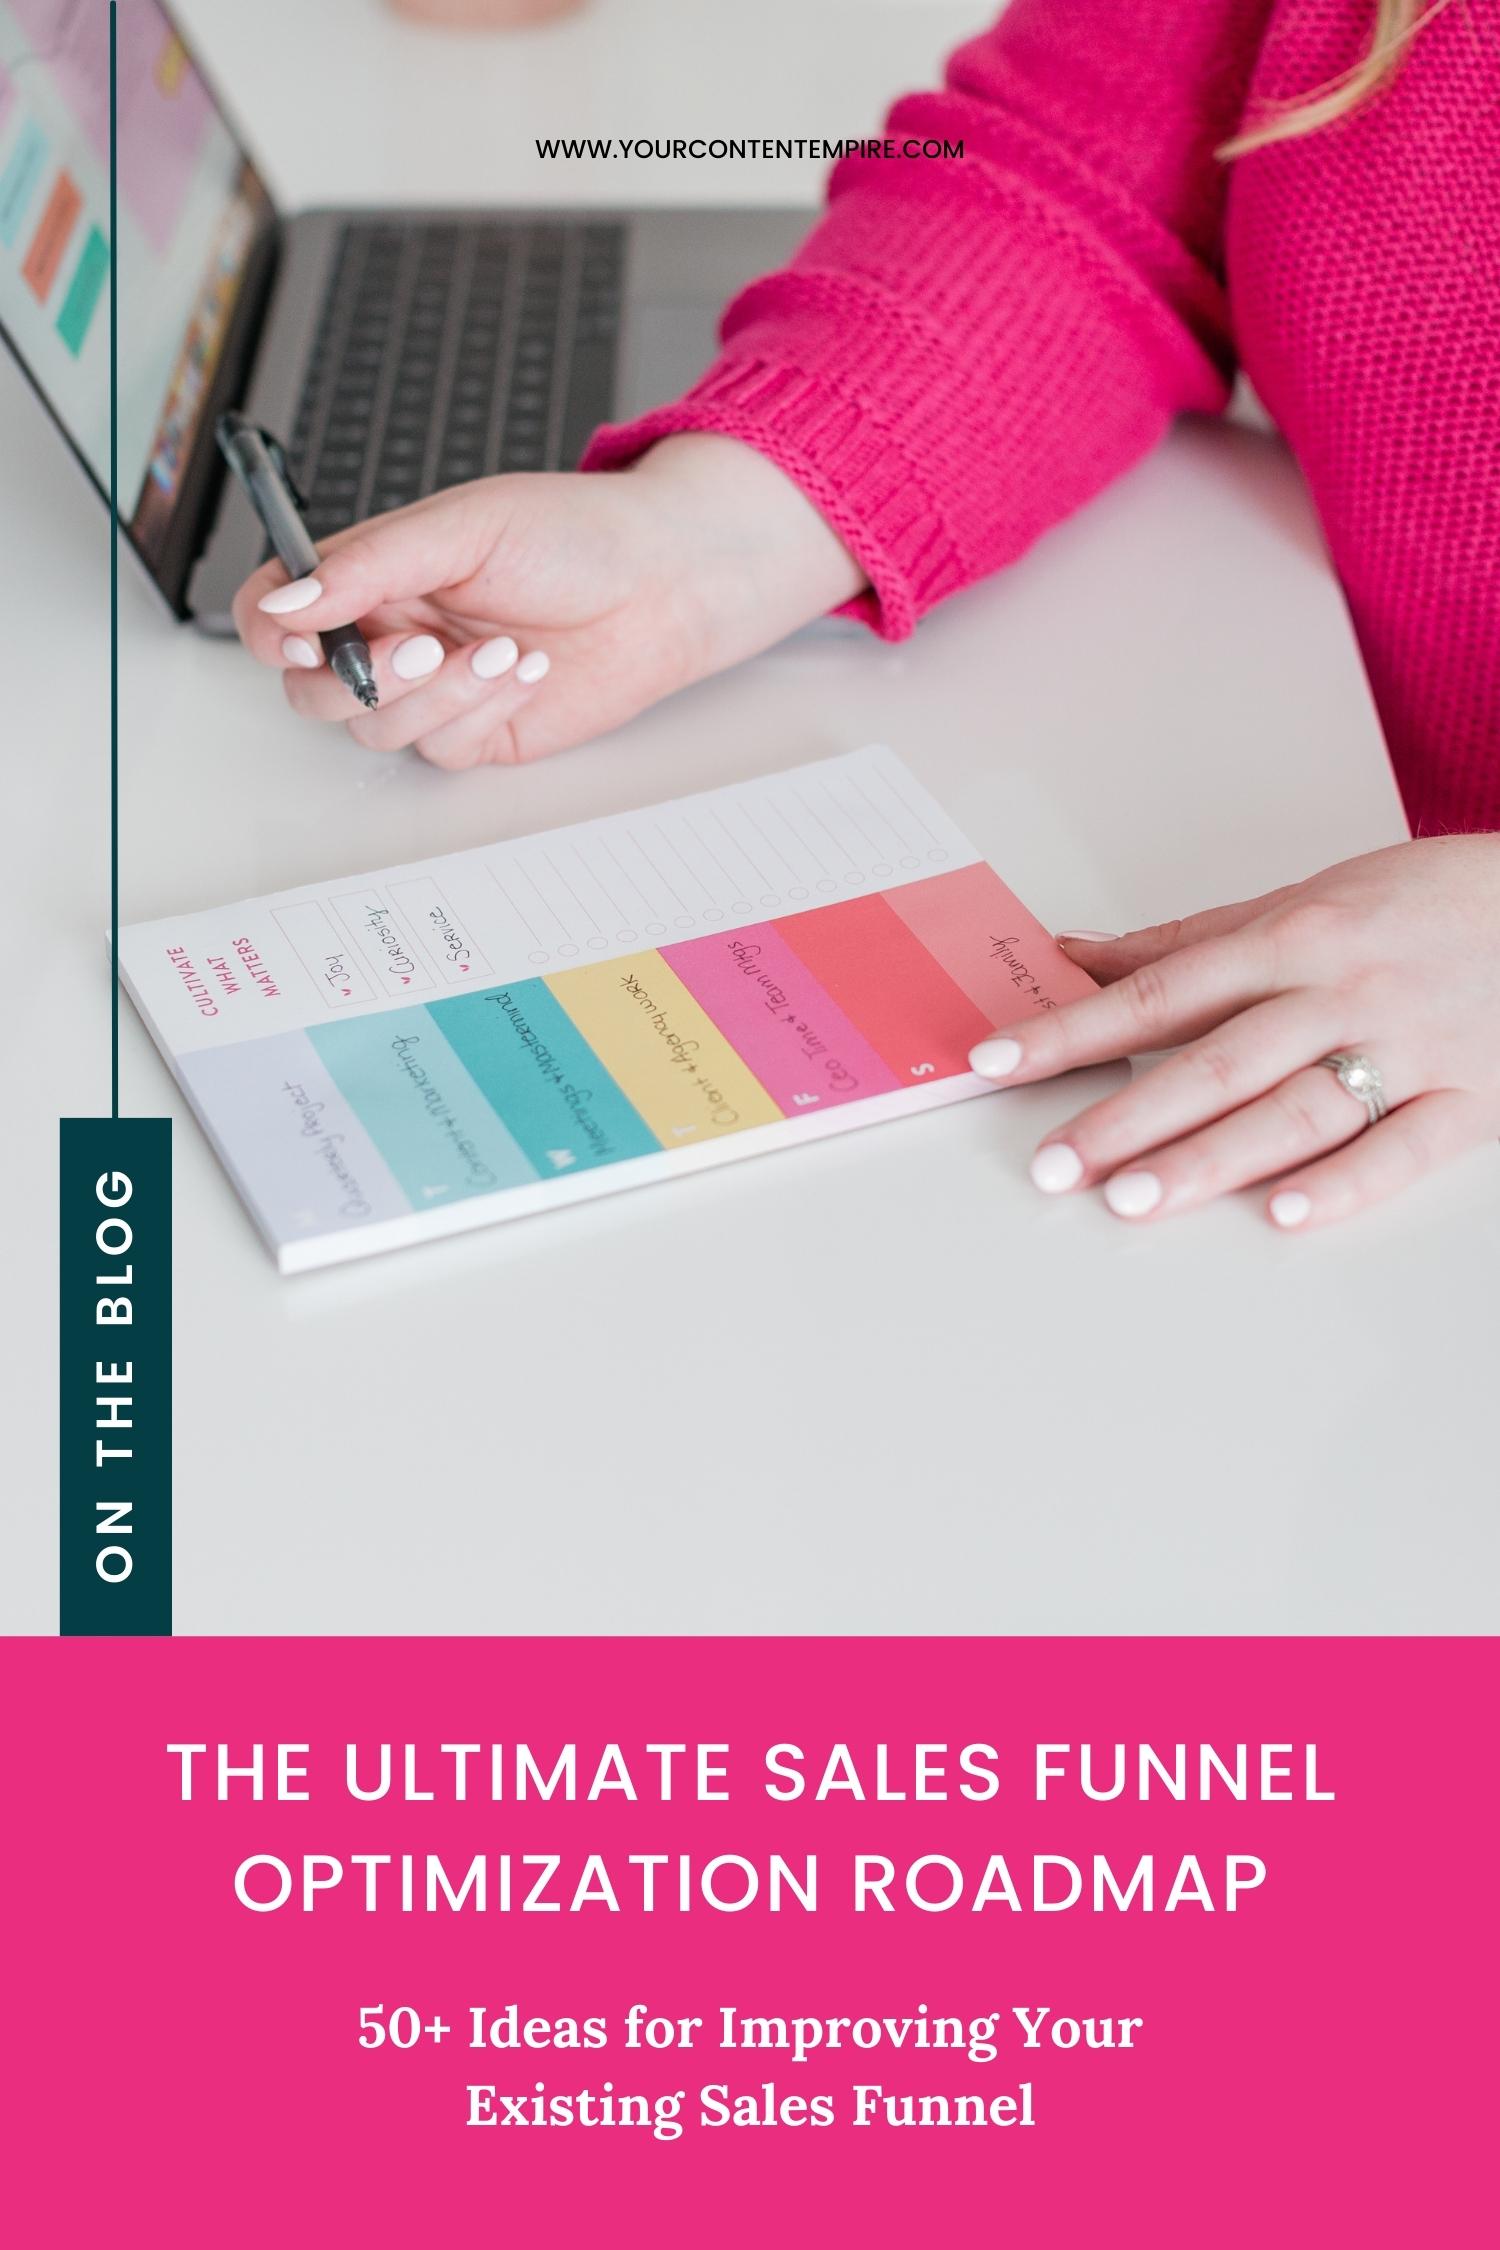 50+ Funnel Optimization Ideas to Tweak Your Way to More Sales